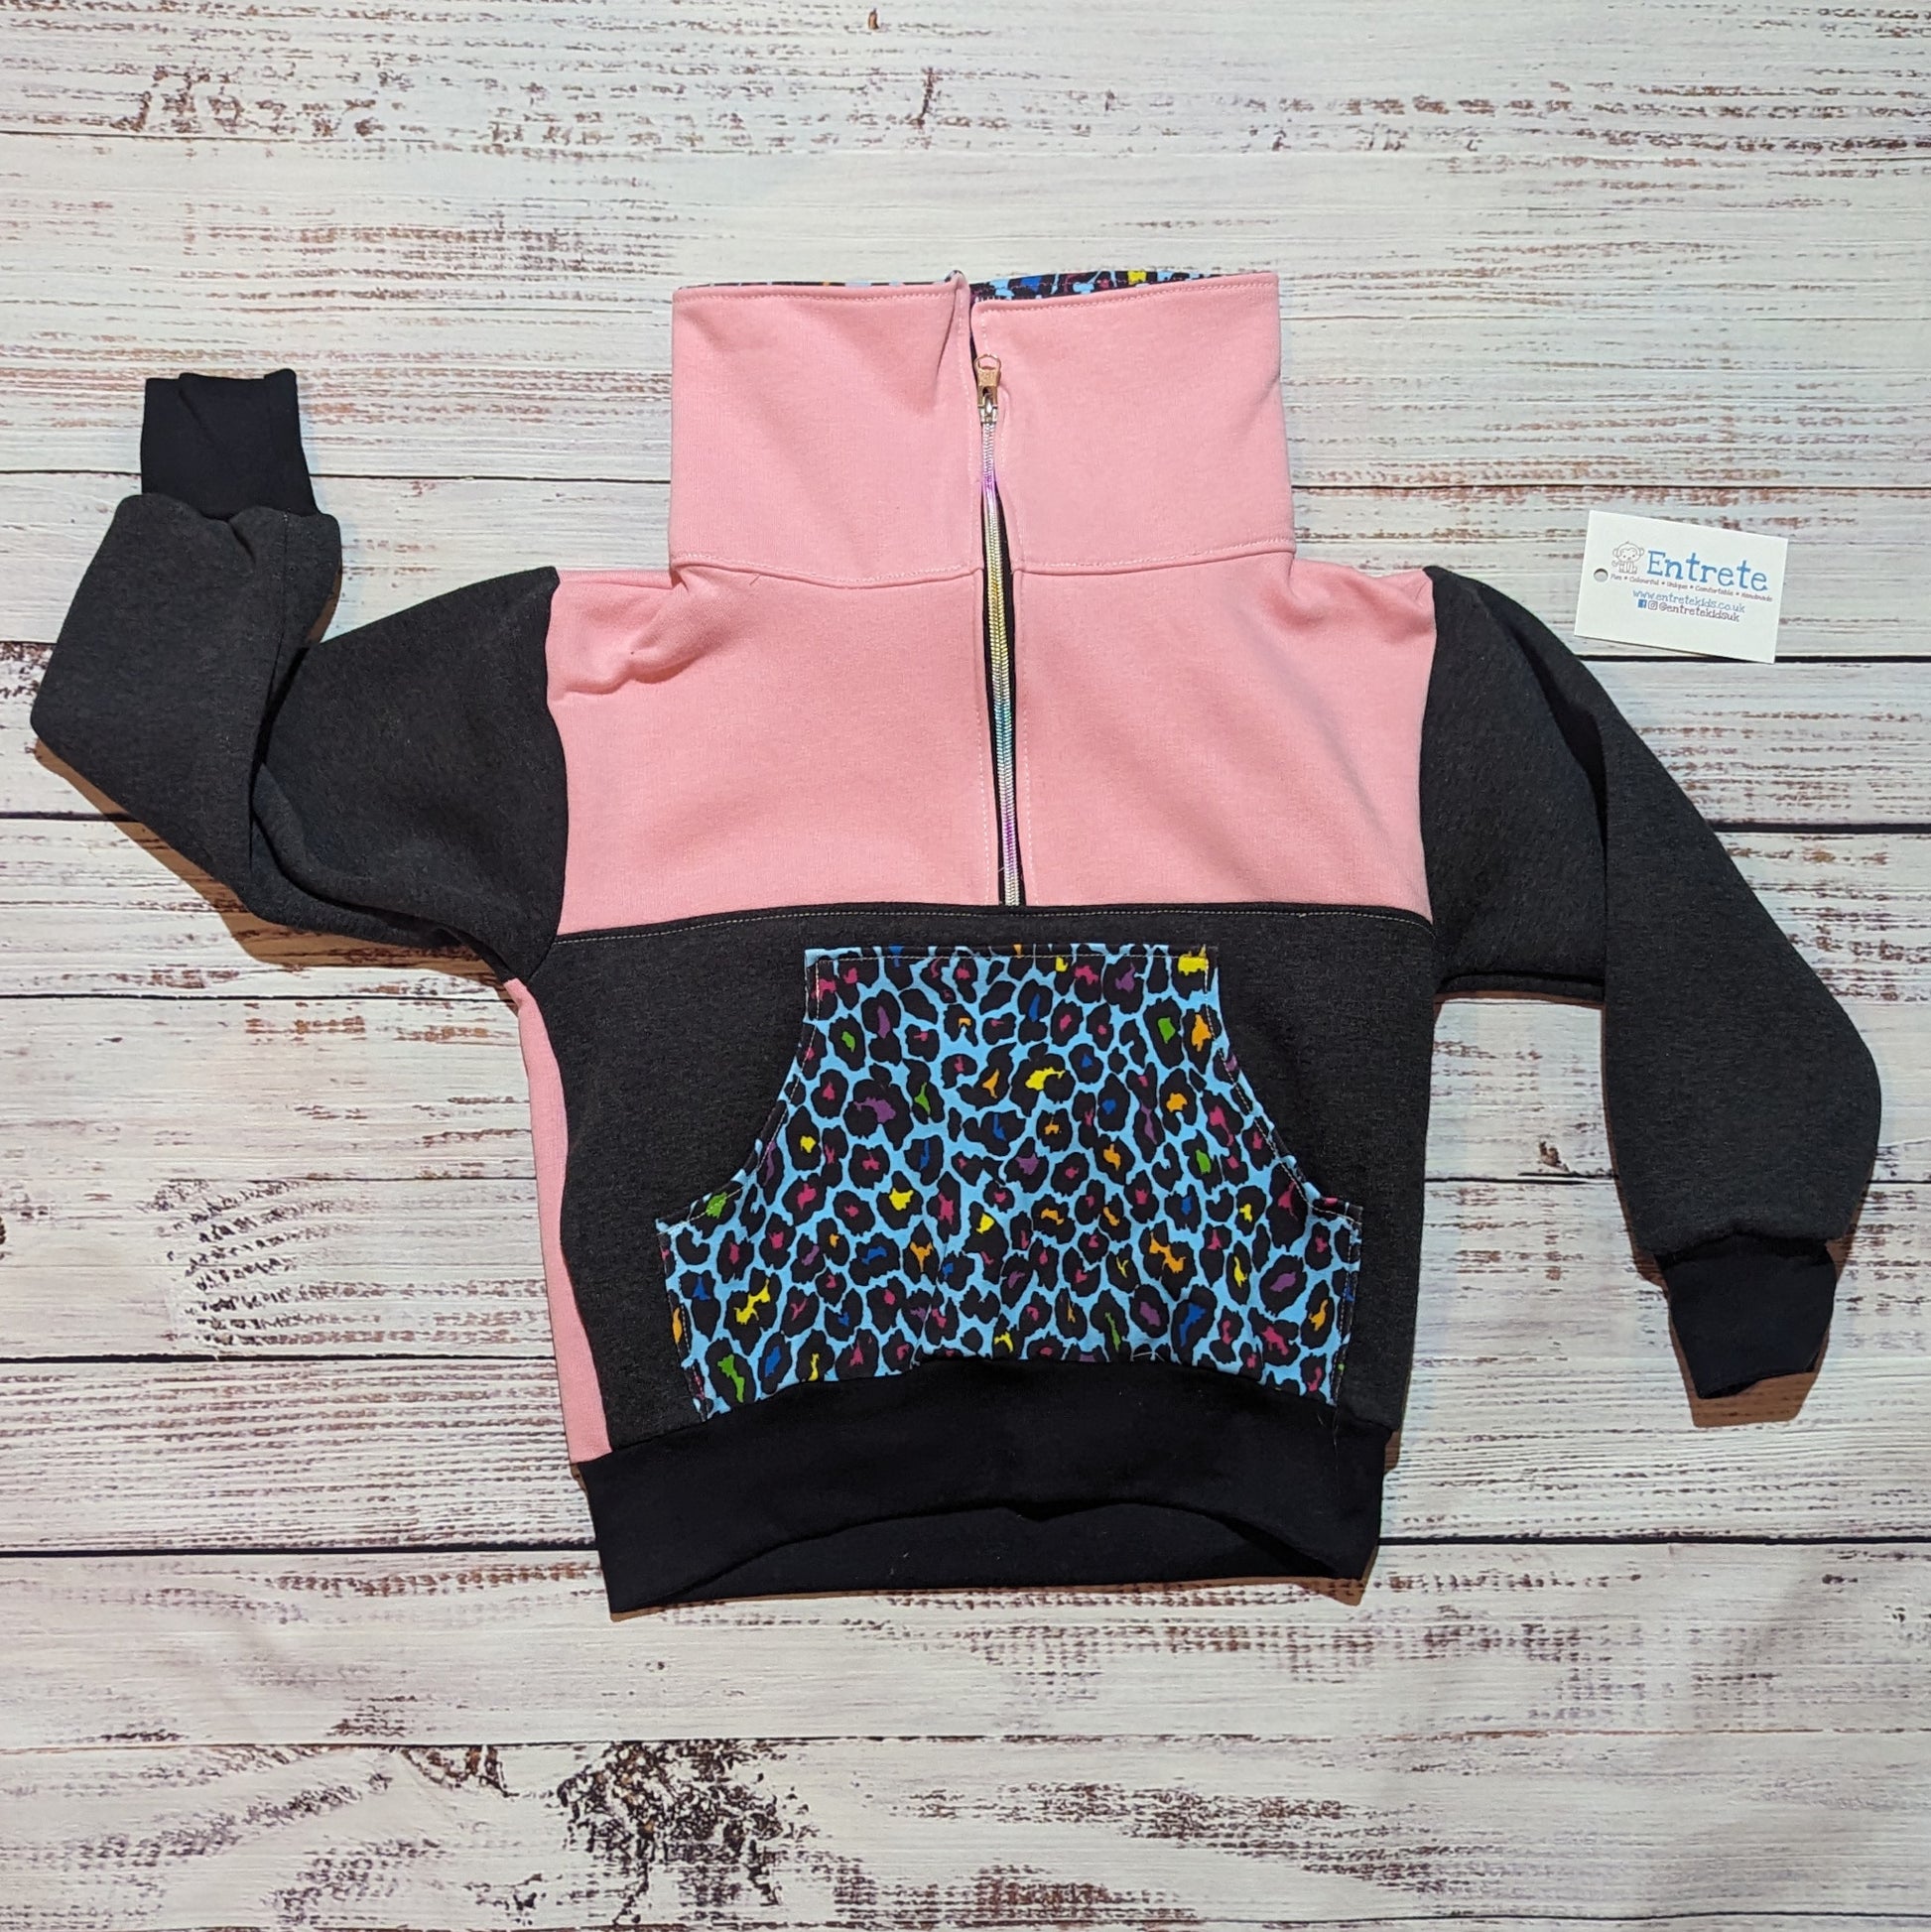 The gorgeous charcoal, pink and neon leopard print zip sweatshirt. With colourful animal print on the front pocket and collar. Shown with the collar closed for warmth.